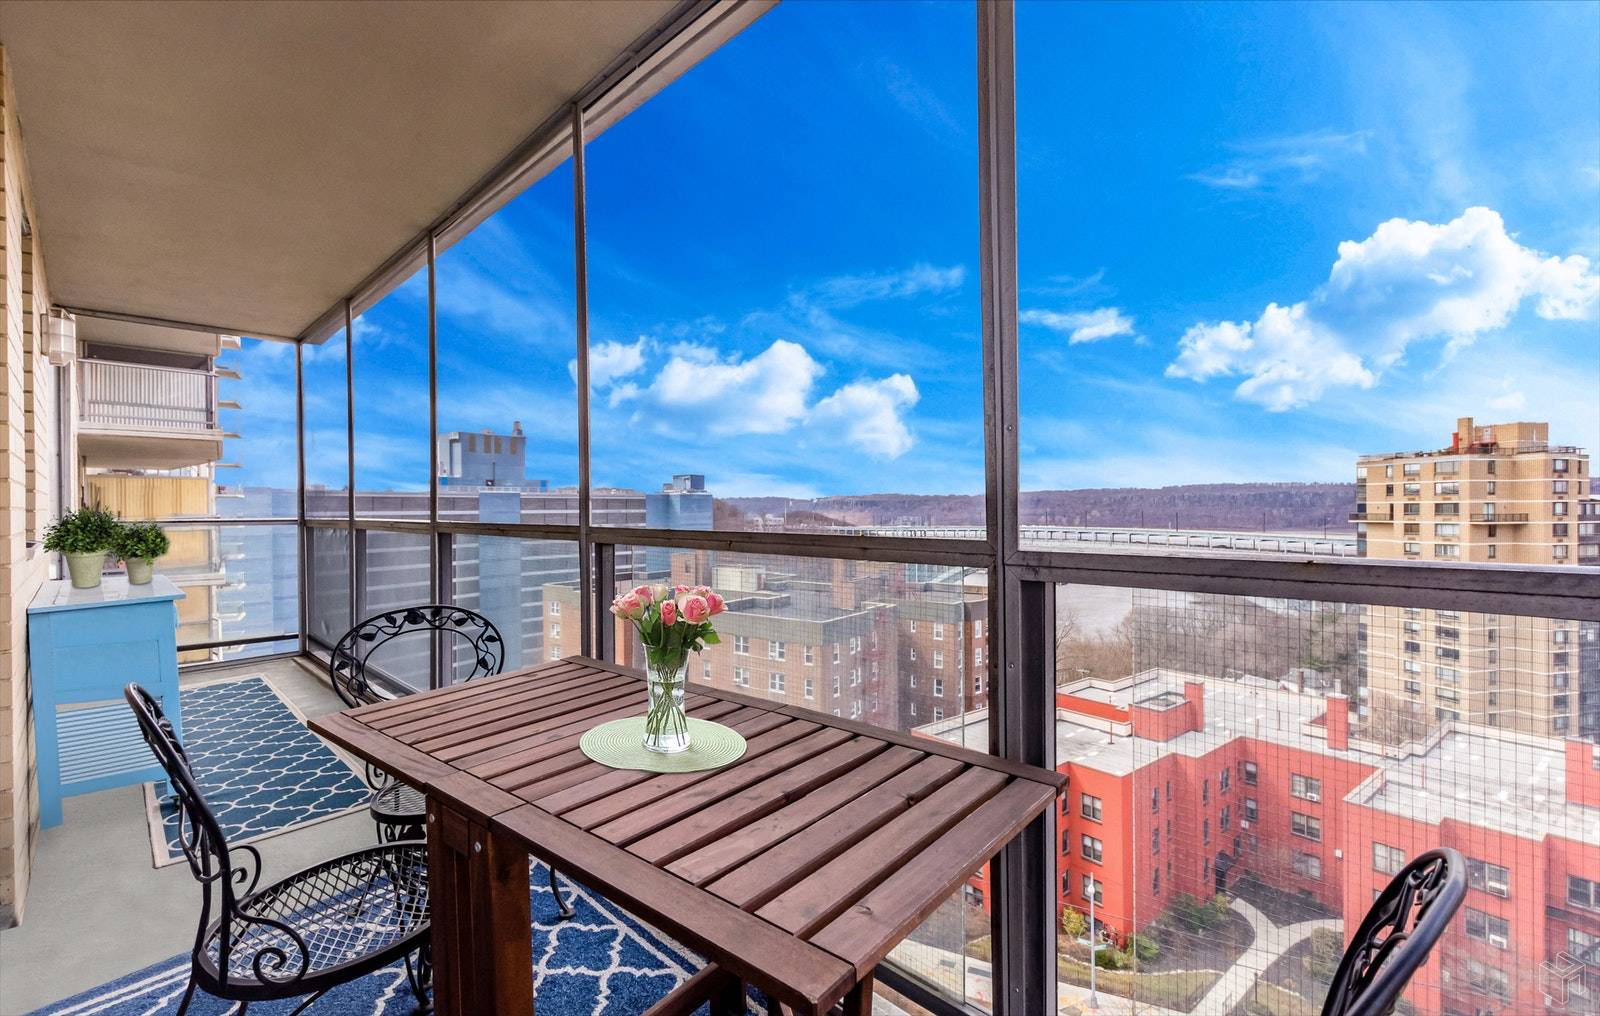 This grand residence is enrobed by open city, river, and sky views in three directions offering rare residential space with two private, screened in balconies, and a magnificently livable and ...